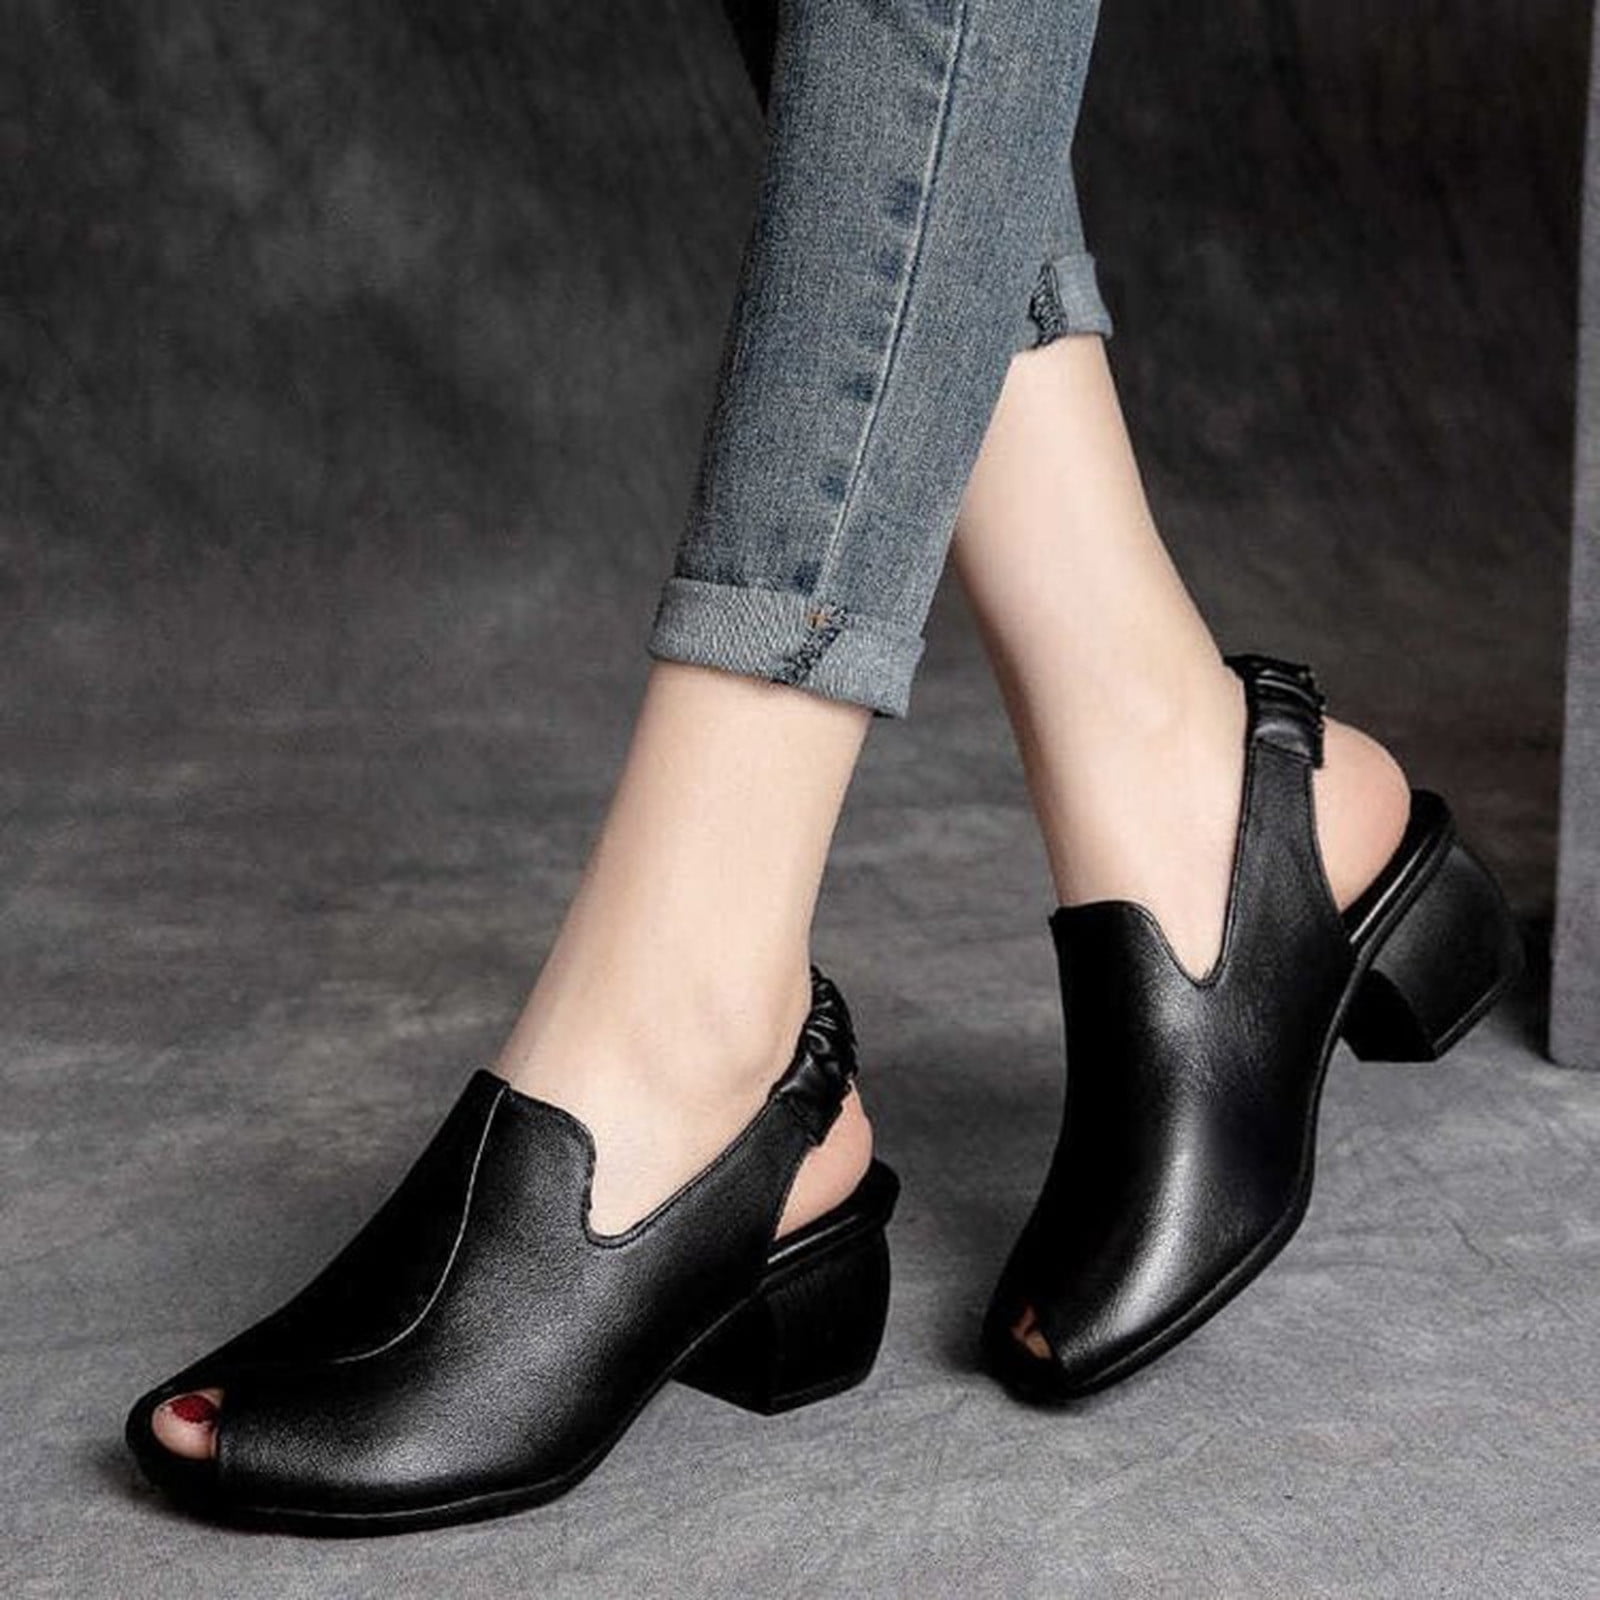 arch support dress shoes for women